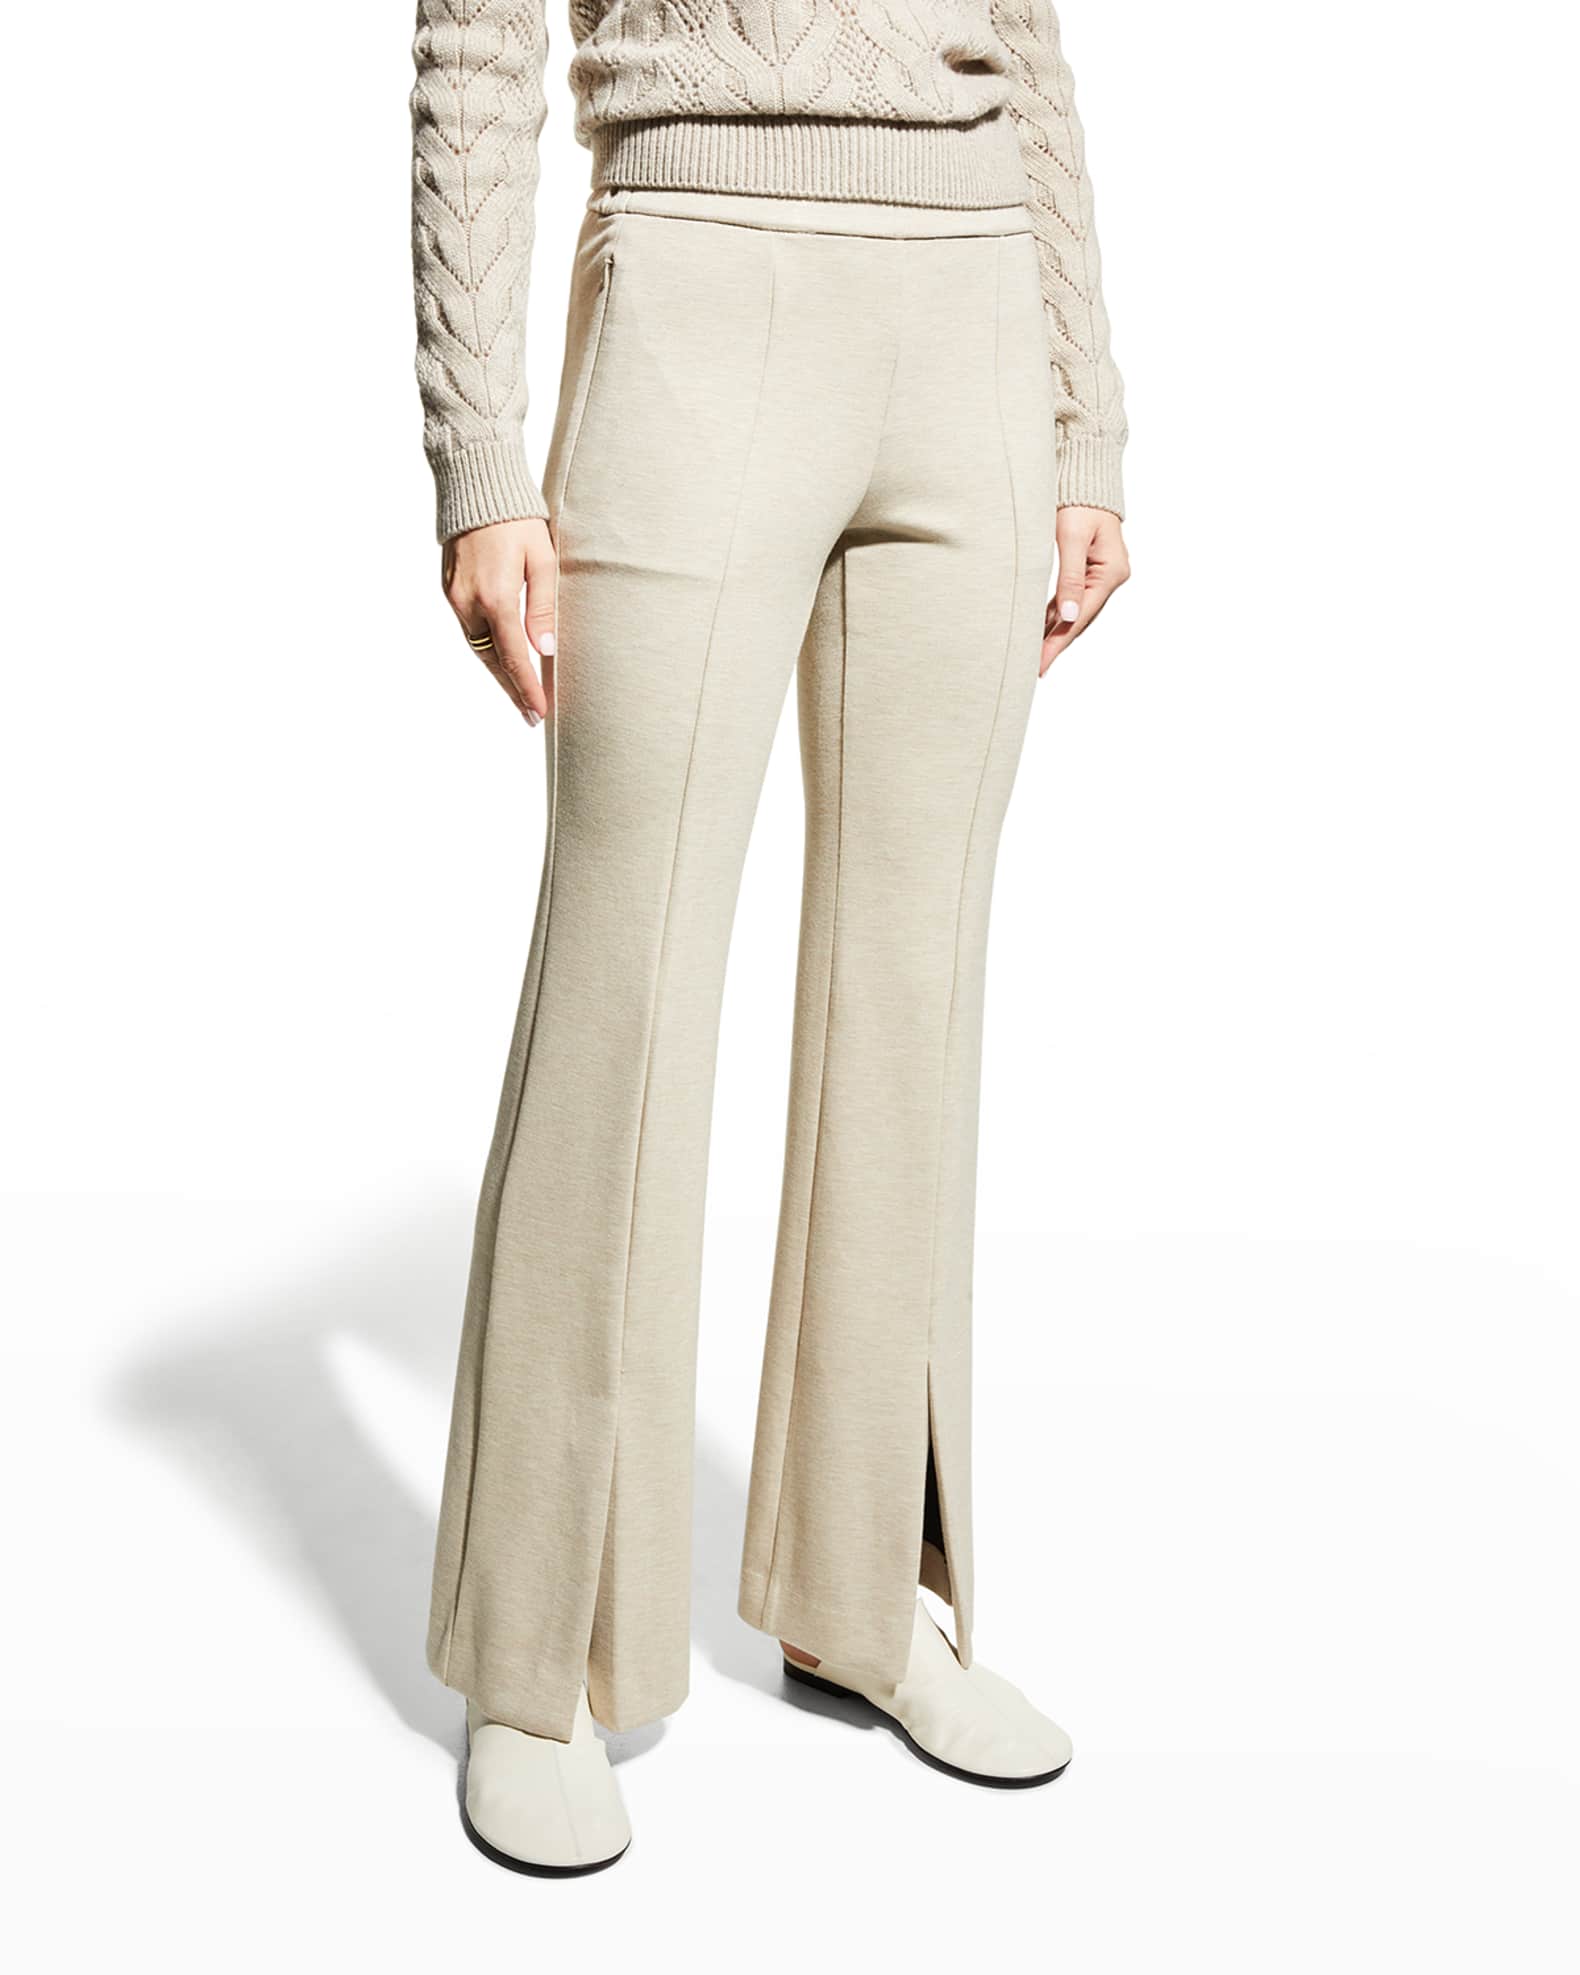 Demitria Flare-Leg Double-Knit Vented Pants 0